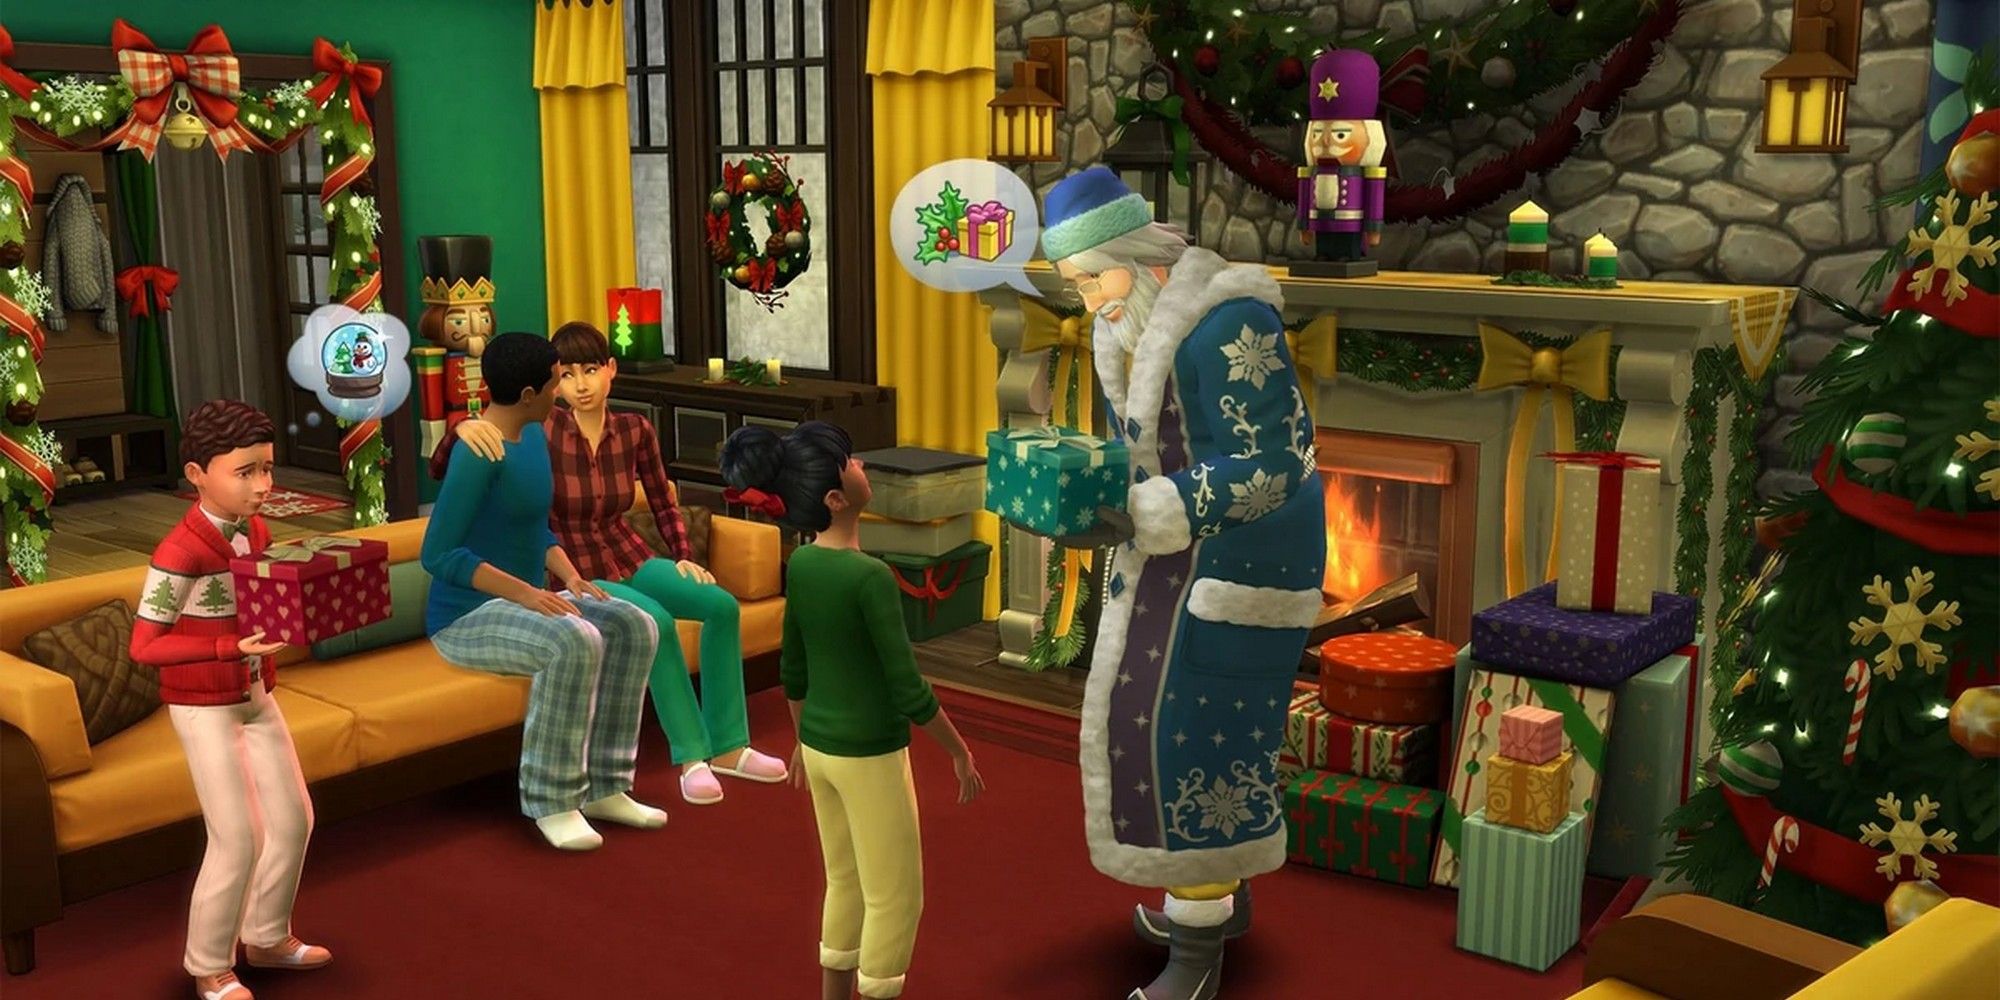 Sims 4 Winterfest Christmas Father Winter Presents Family Gifts Tree December Winter